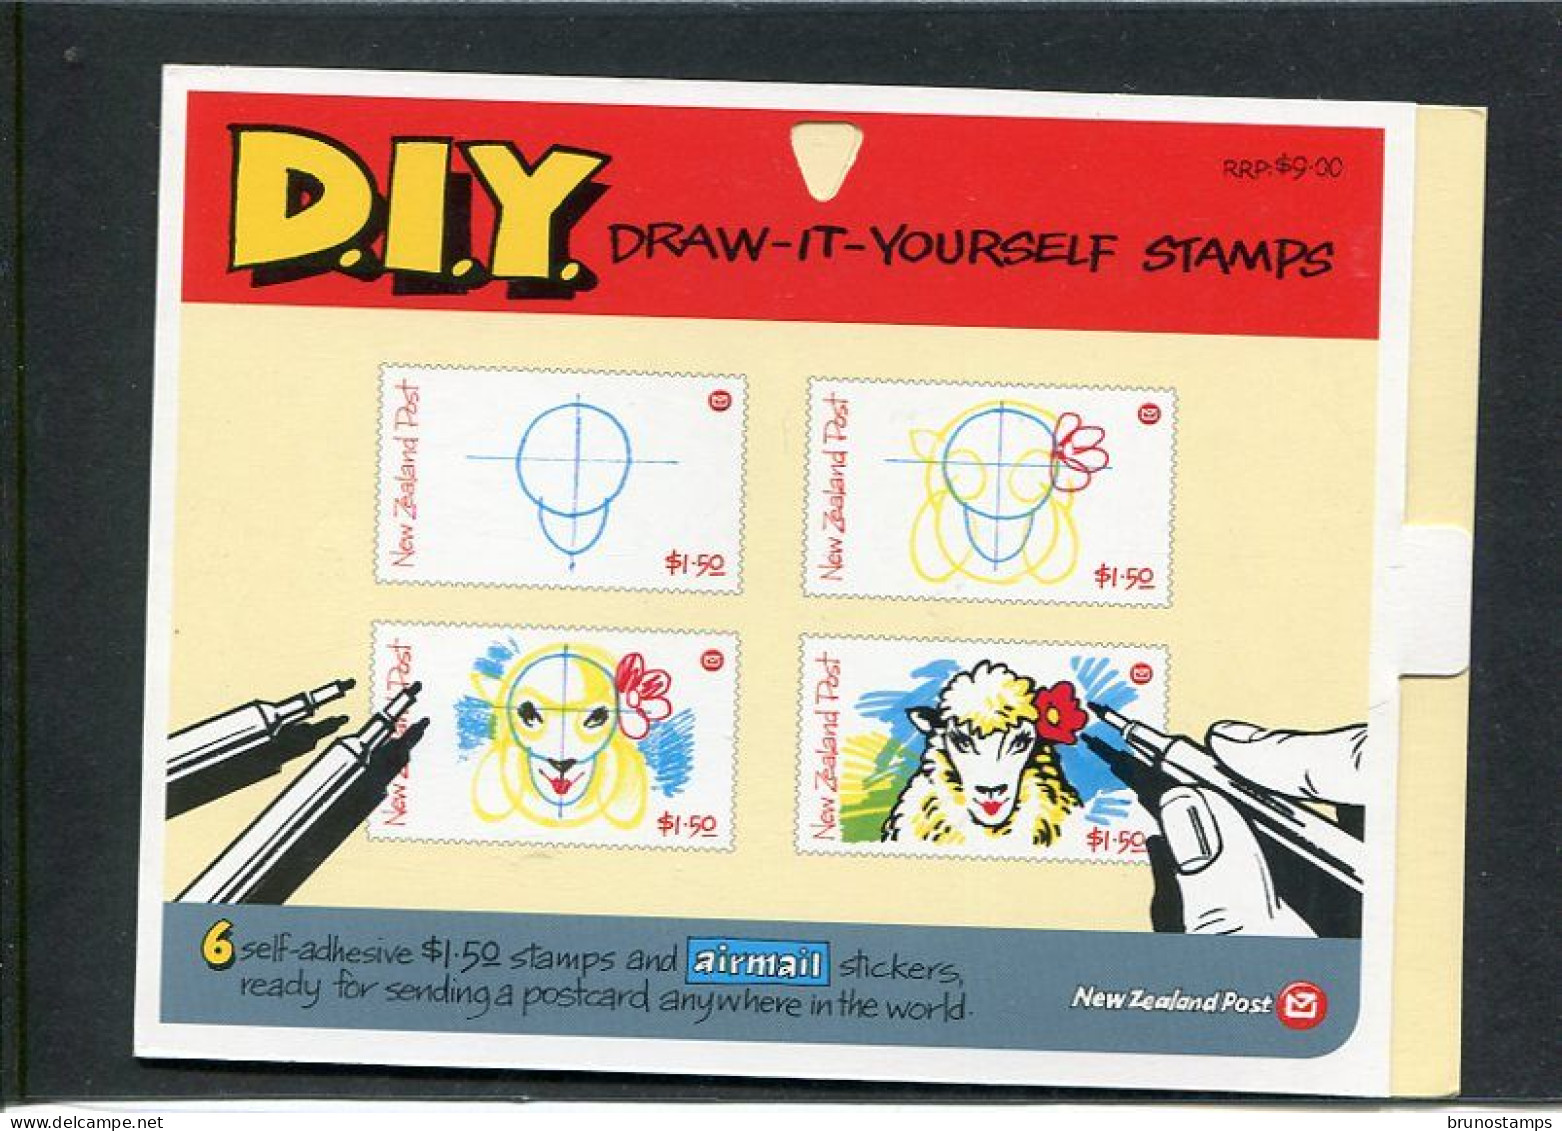 NEW ZEALAND - 2004  DRAW IT YOURSELF STAMPS  SELF ADHESIVE  SHEETLET  OF 6 MINT NH - Ungebraucht